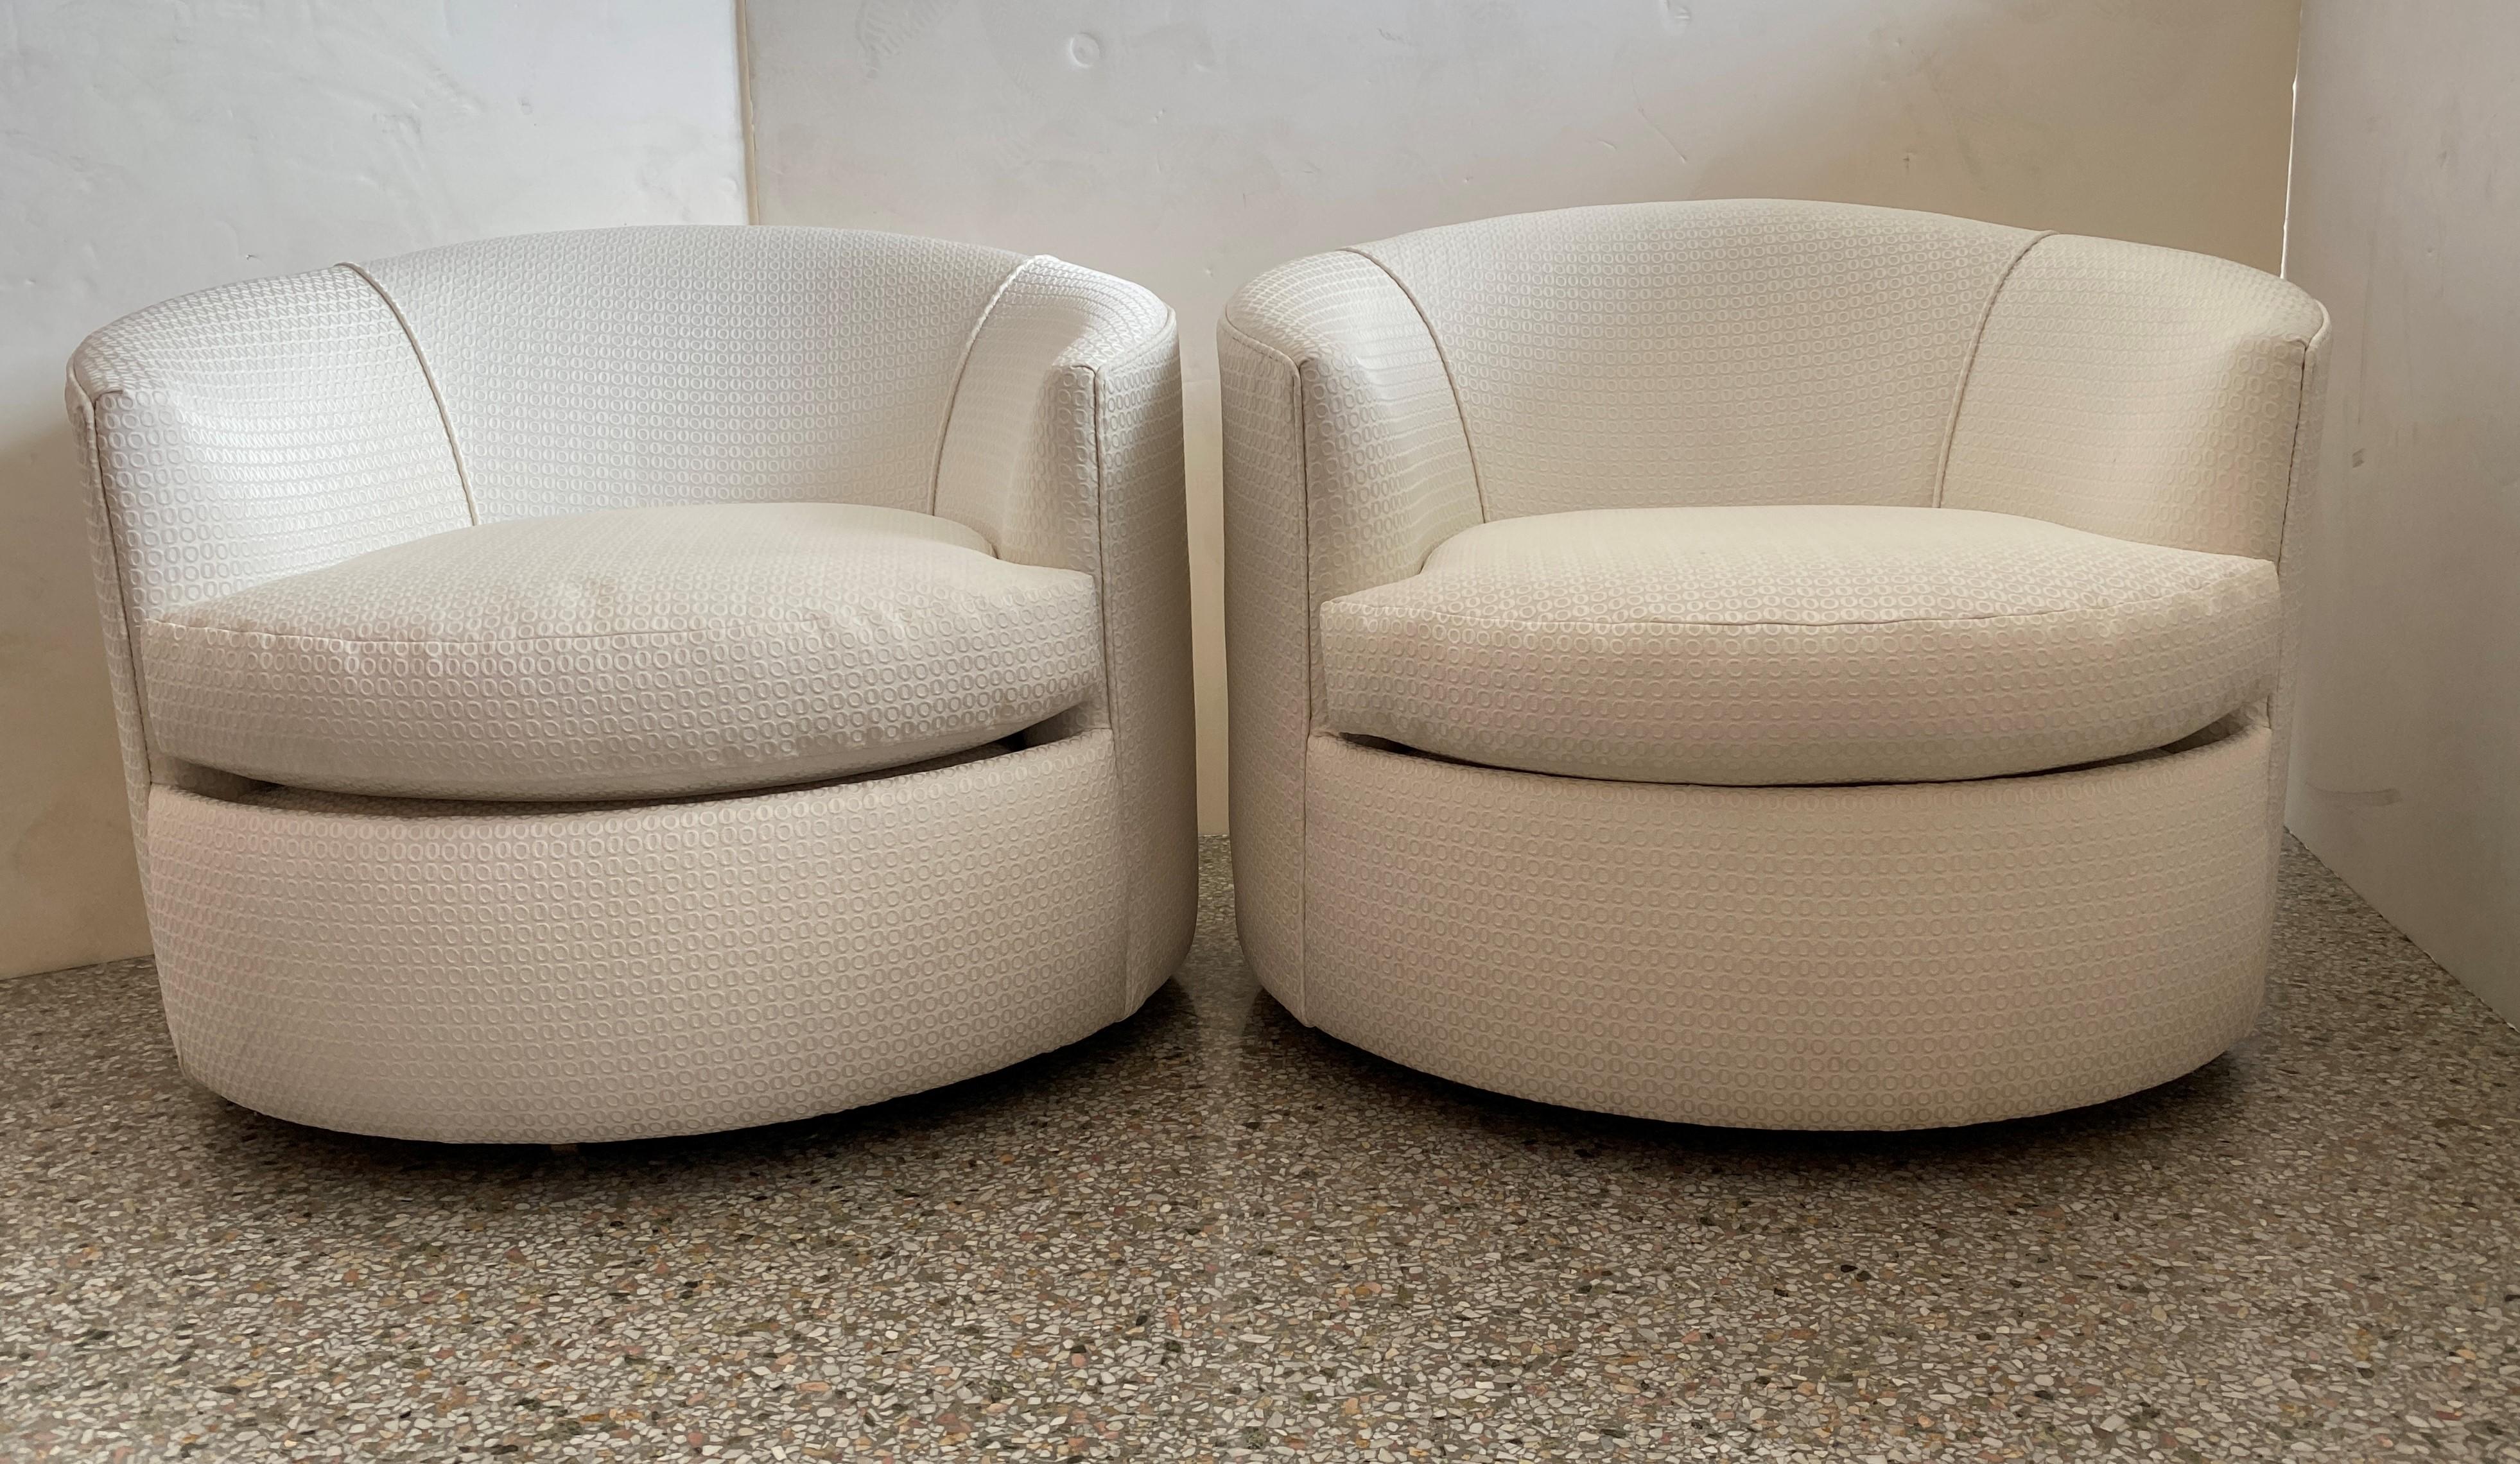 These stylish, low profile swivel club chairs date to the 1970s and have been professionally reupholstered (June 2020) in a woven fabric.

Note: Seat height in the middle of the cushion is 16